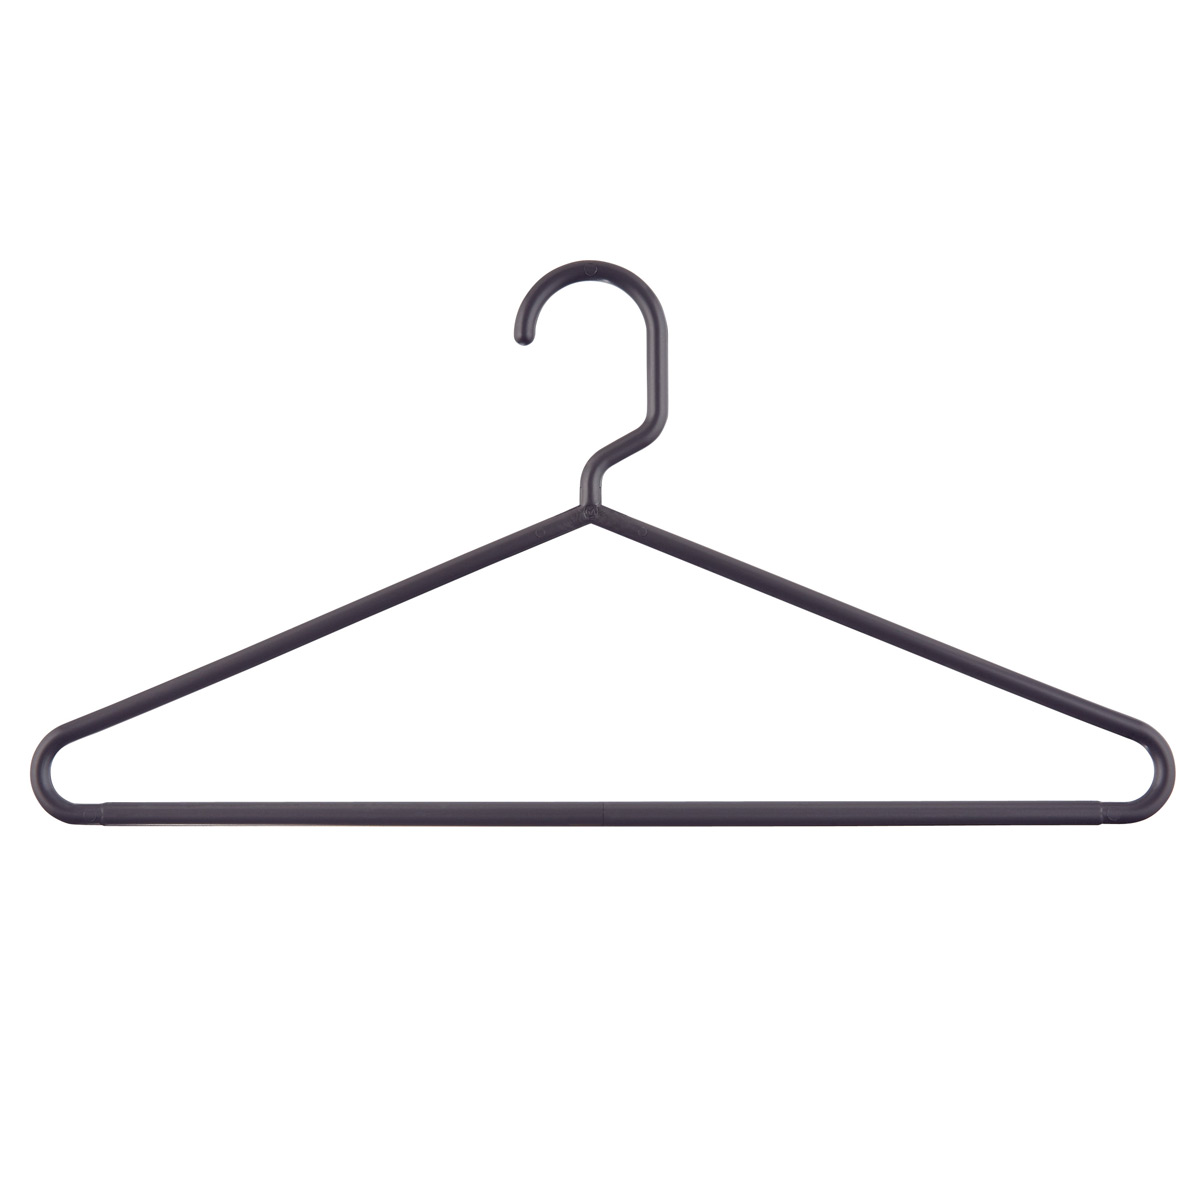 https://www.containerstore.com/catalogimages/413107/10079803_heavy_duty_tubular_hangers_.jpg